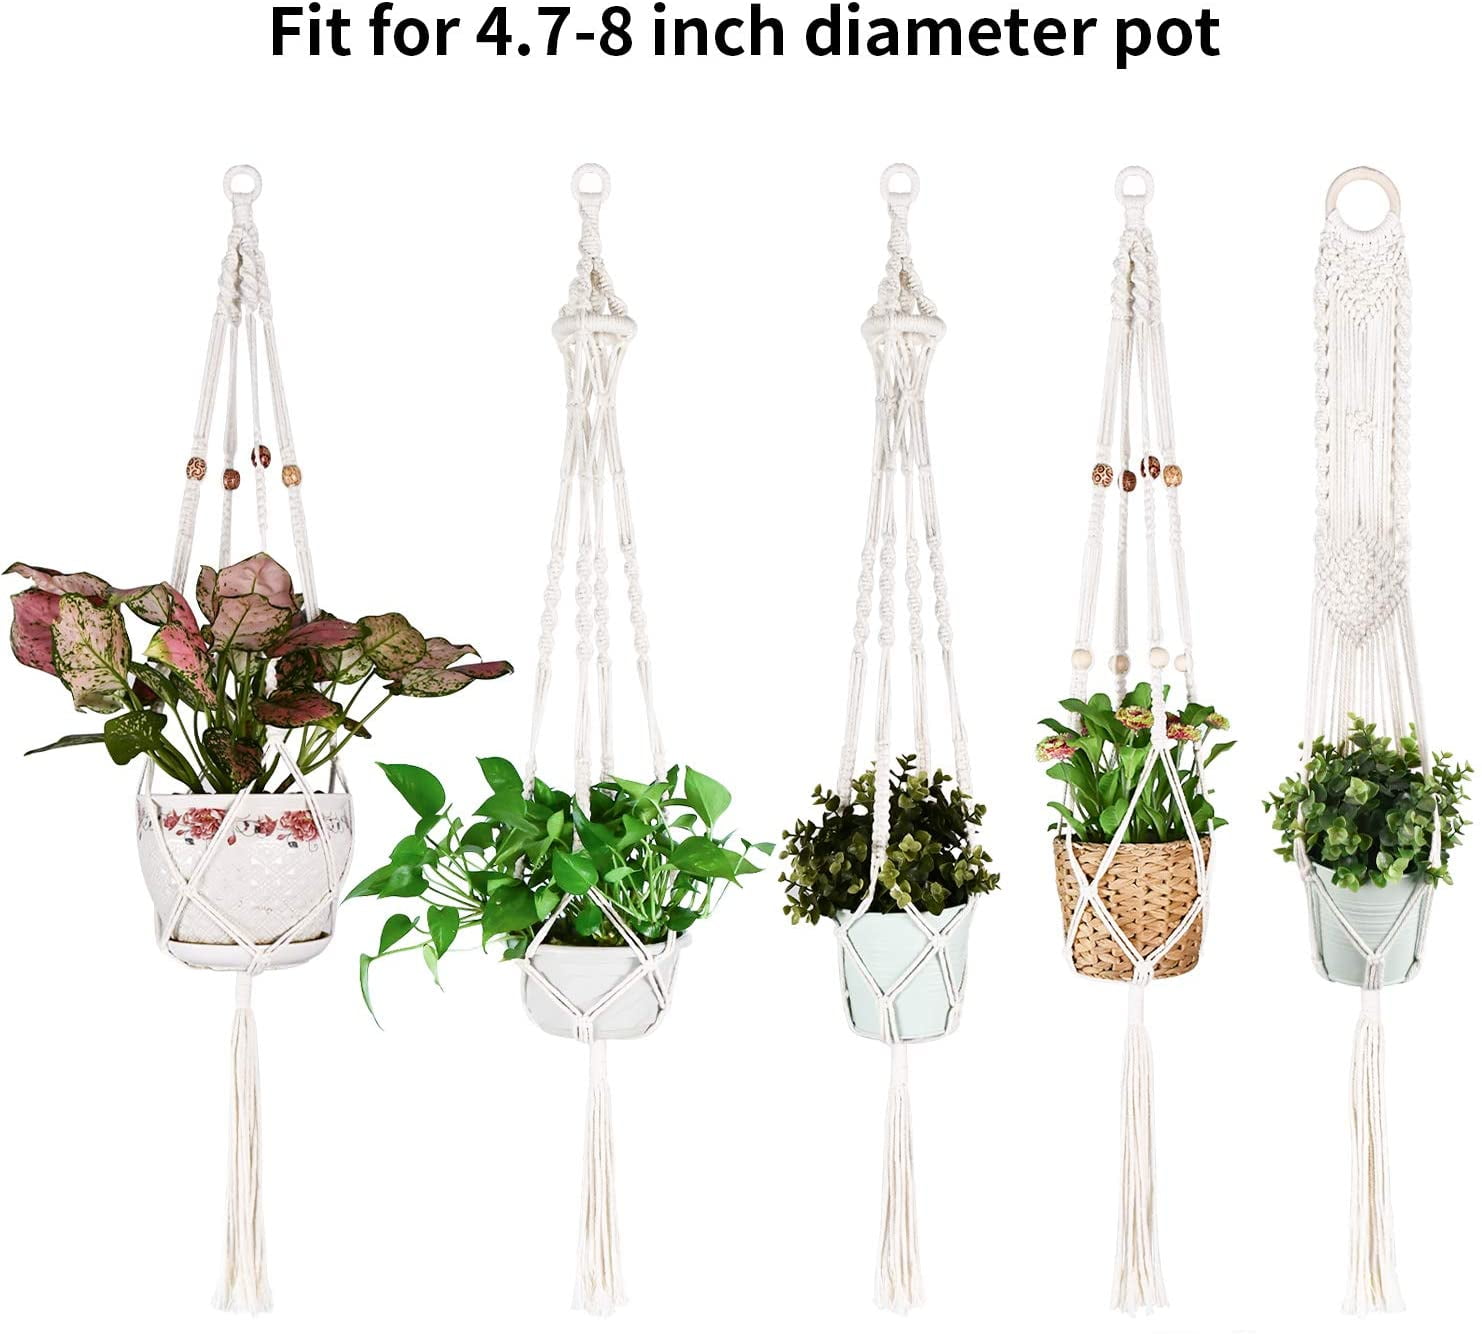 Handmade Woven Natural Cotton Rope Macrame Wall Hanging Planter Basket Flower Pot Odorless Not-Rotten for Indoor Outdoor Garden Patio Balcony Ceiling Decorations Boho Home Decor 2 Pcs Plant Hanger 